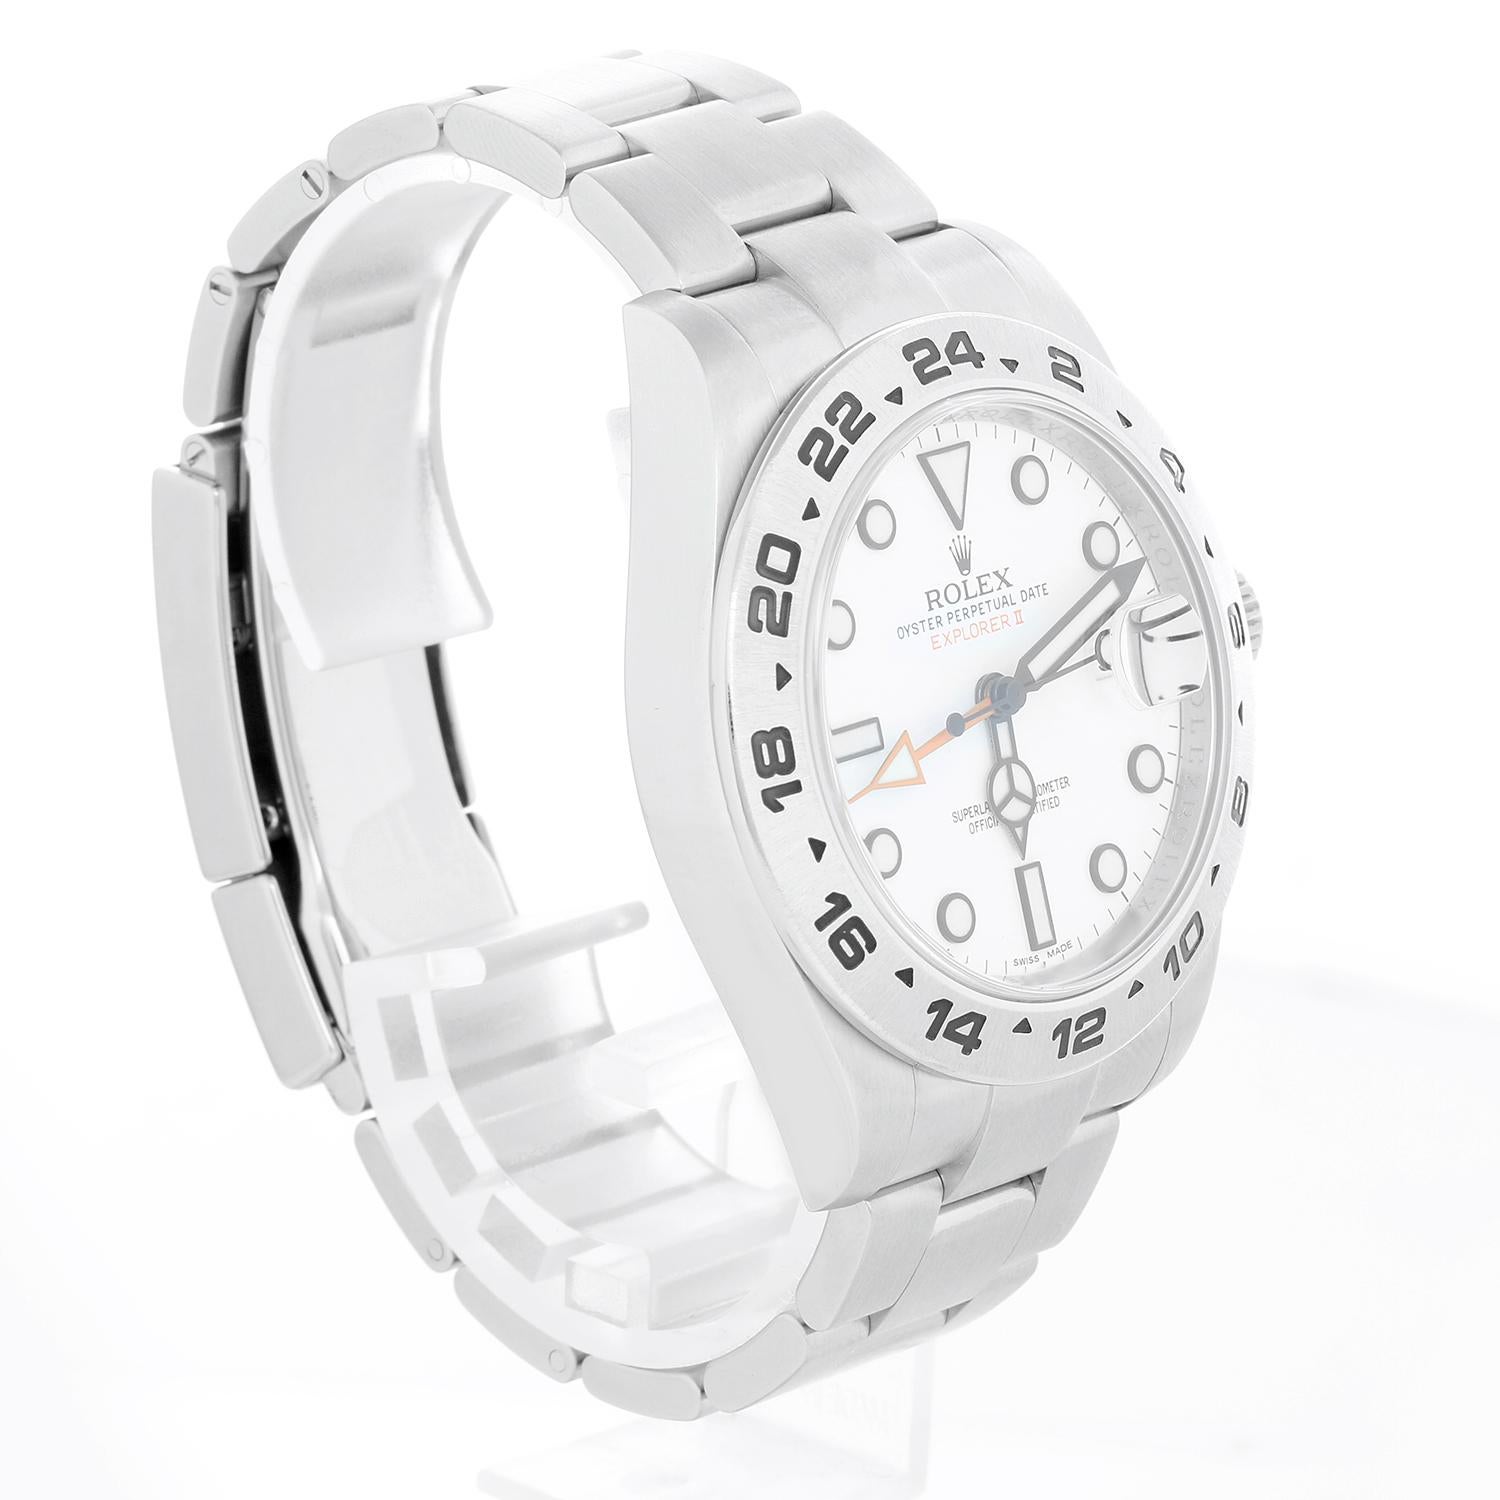 Rolex Explorer II Men's Stainless Steel Watch 216570 - Automatic winding, 31 jewels, Quickset, sapphire crystal, dual time. Stainless steel case (42mm diameter). White dial with white markers. Stainless steel Oyster bracelet with flip-lock clasp.